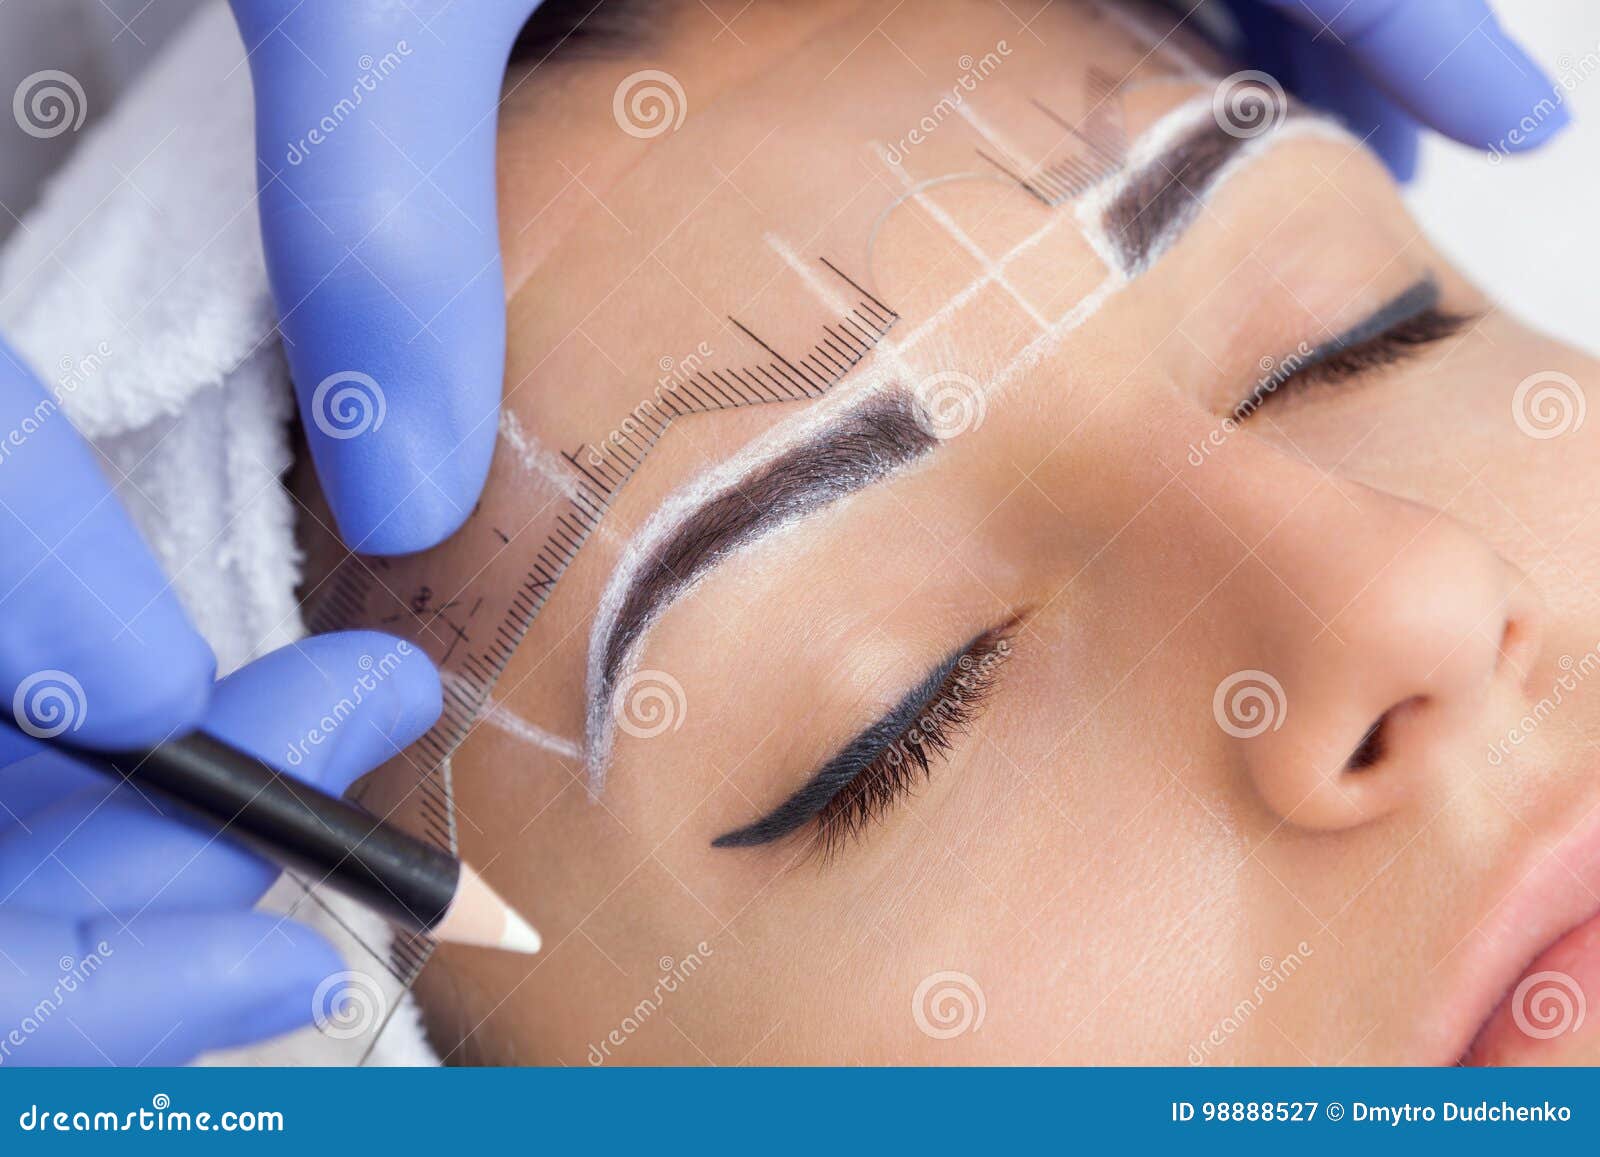 permanent make-up for eyebrows of beautiful woman with thick brows in beauty salon